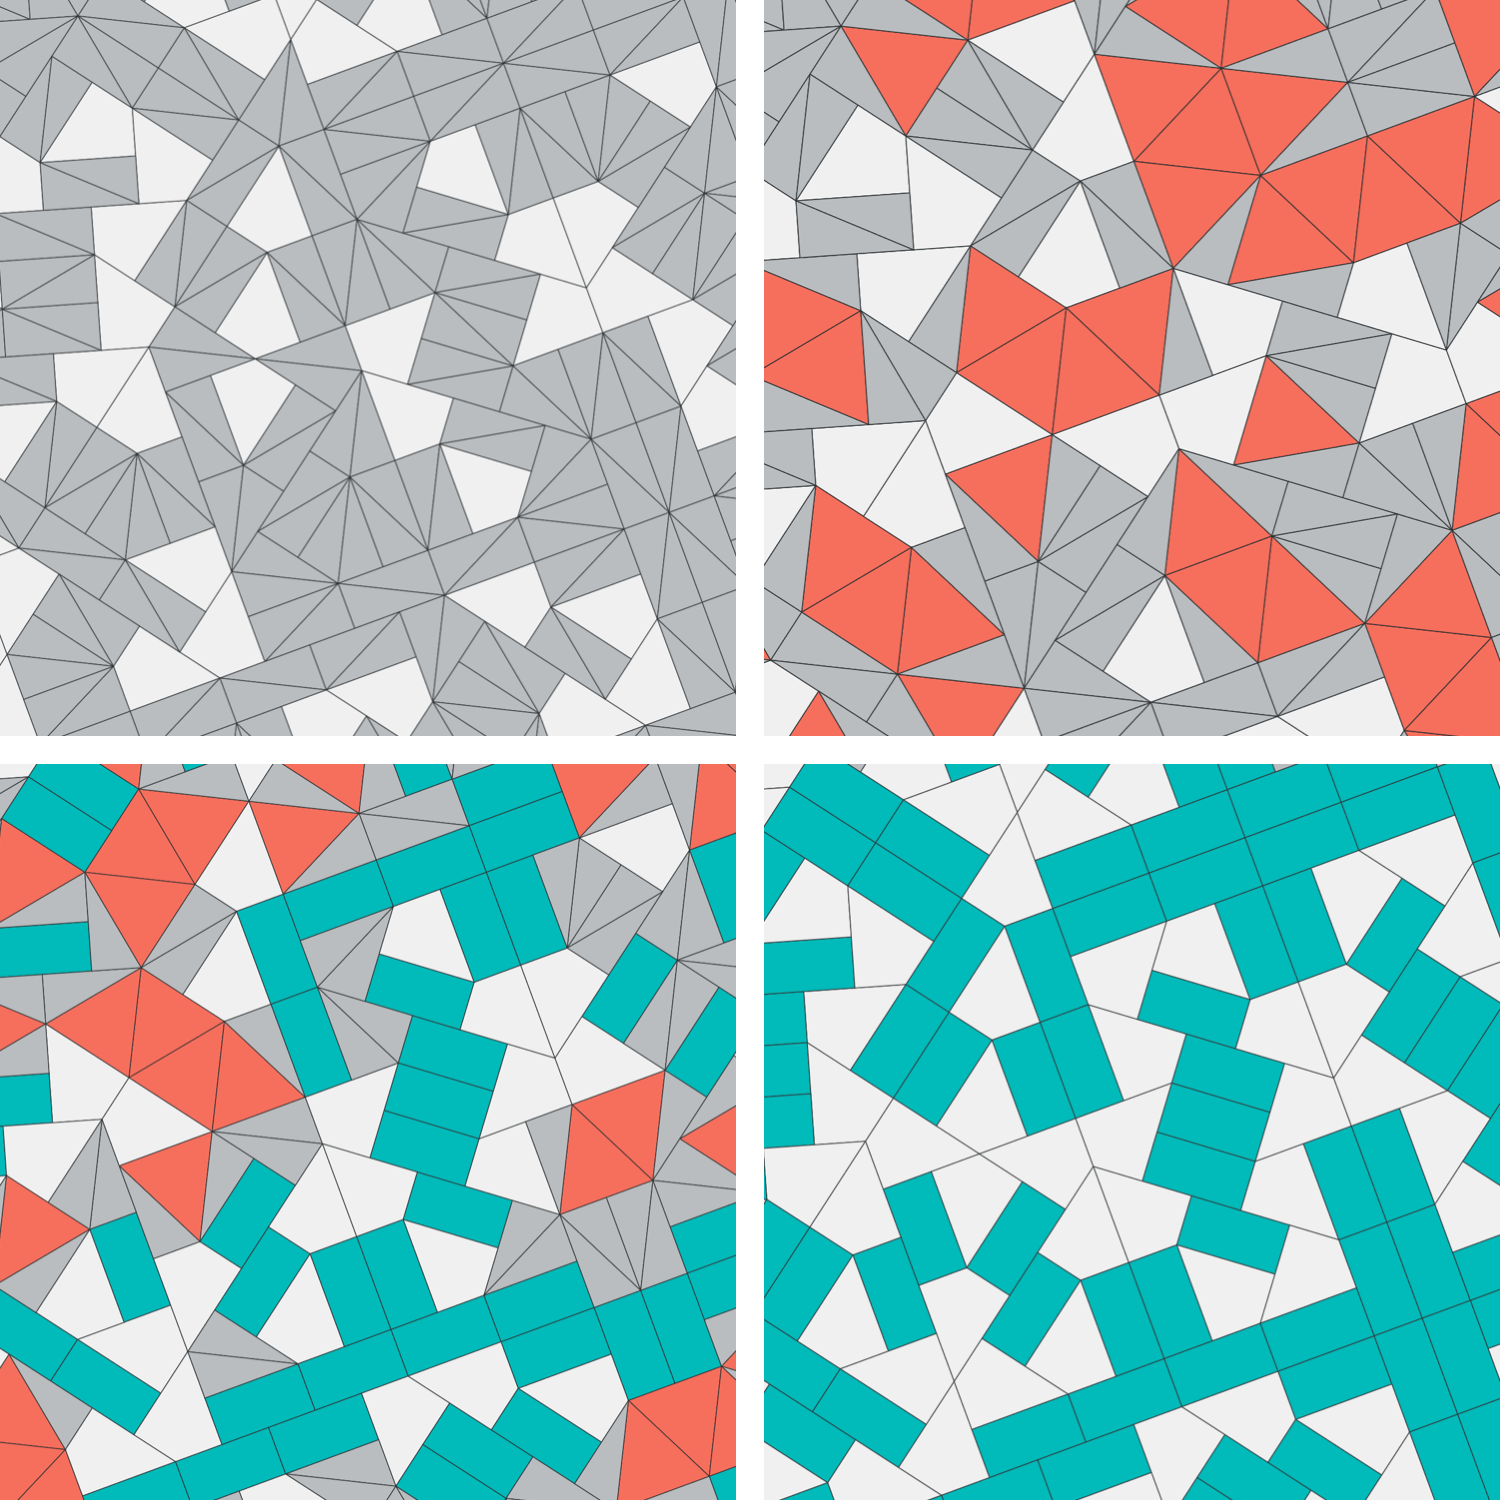 Tilings generated by merging adjacent tiles